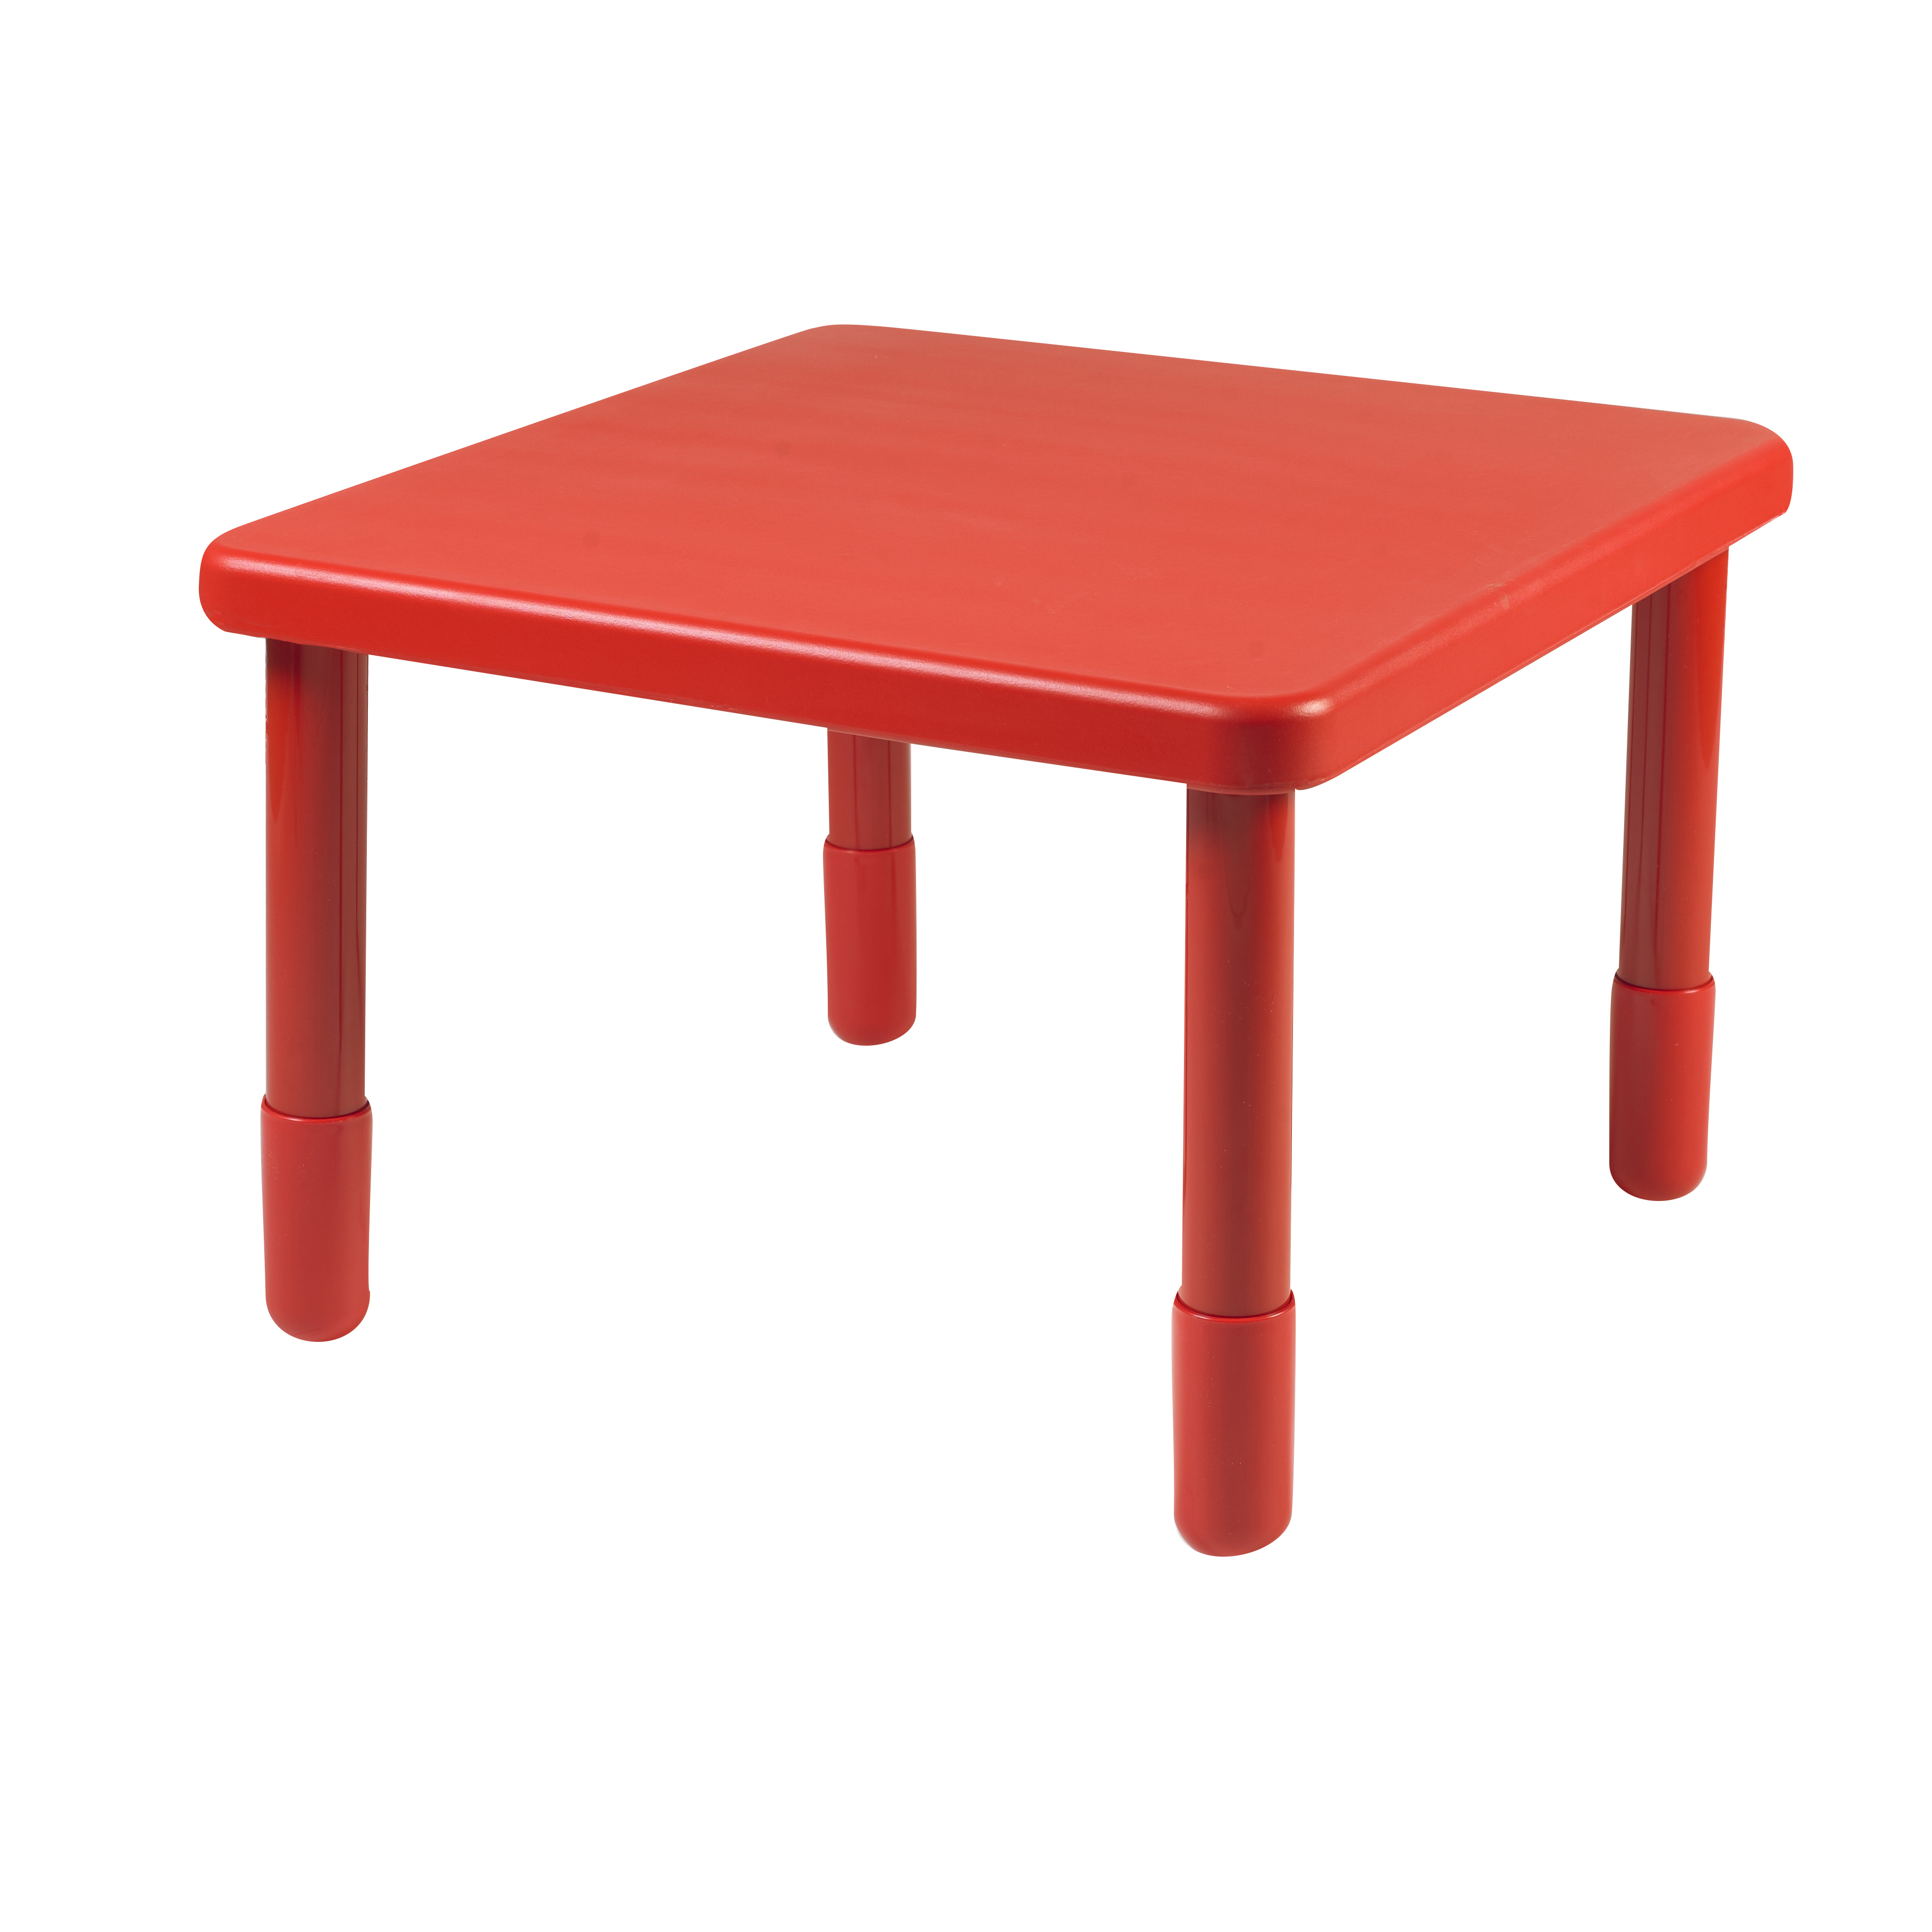 Value 71 cm  Square Table - Candy Apple Red with 45,5 cm  Legs